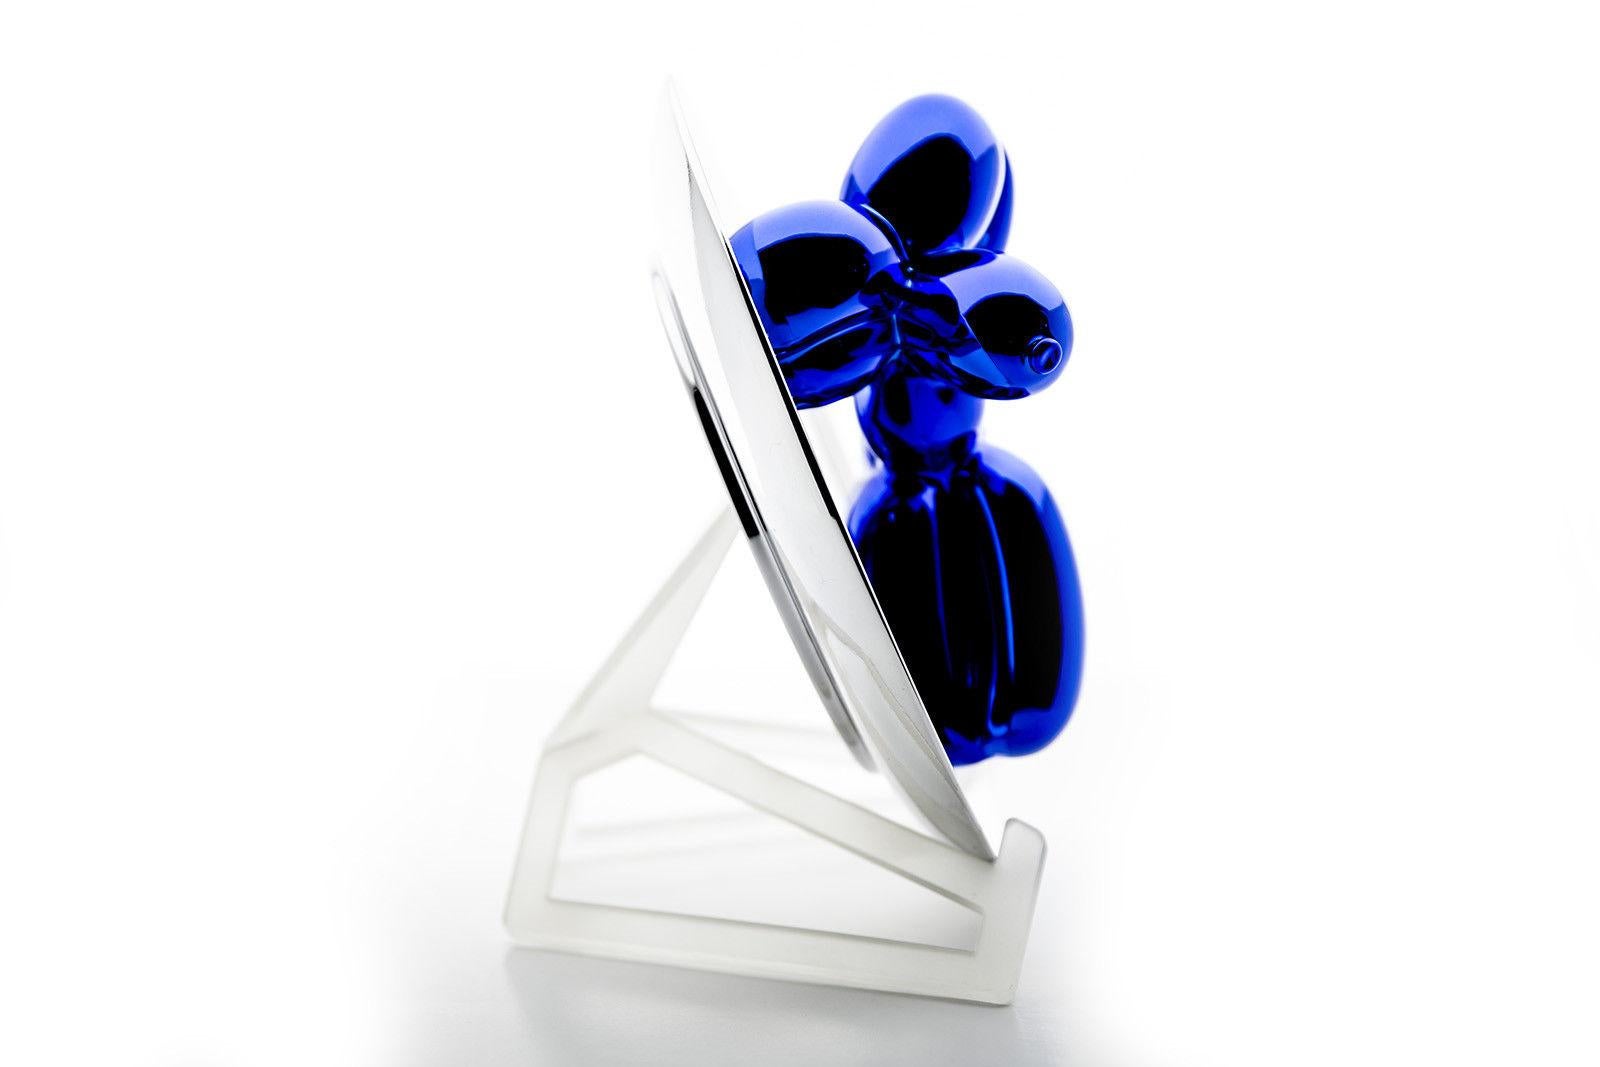 Artist: Jeff Koons 
Title: Balloon Dog (Blue) 
Medium: porcelain 
Size: 10 1/2 x 10 1/2 x 5 inches 
Edition of 2300 plus 50 APs 2002 
Condition of this particular blue dog is museum grade quality.   
Includes: Dog, box, stand as if purchased new. 